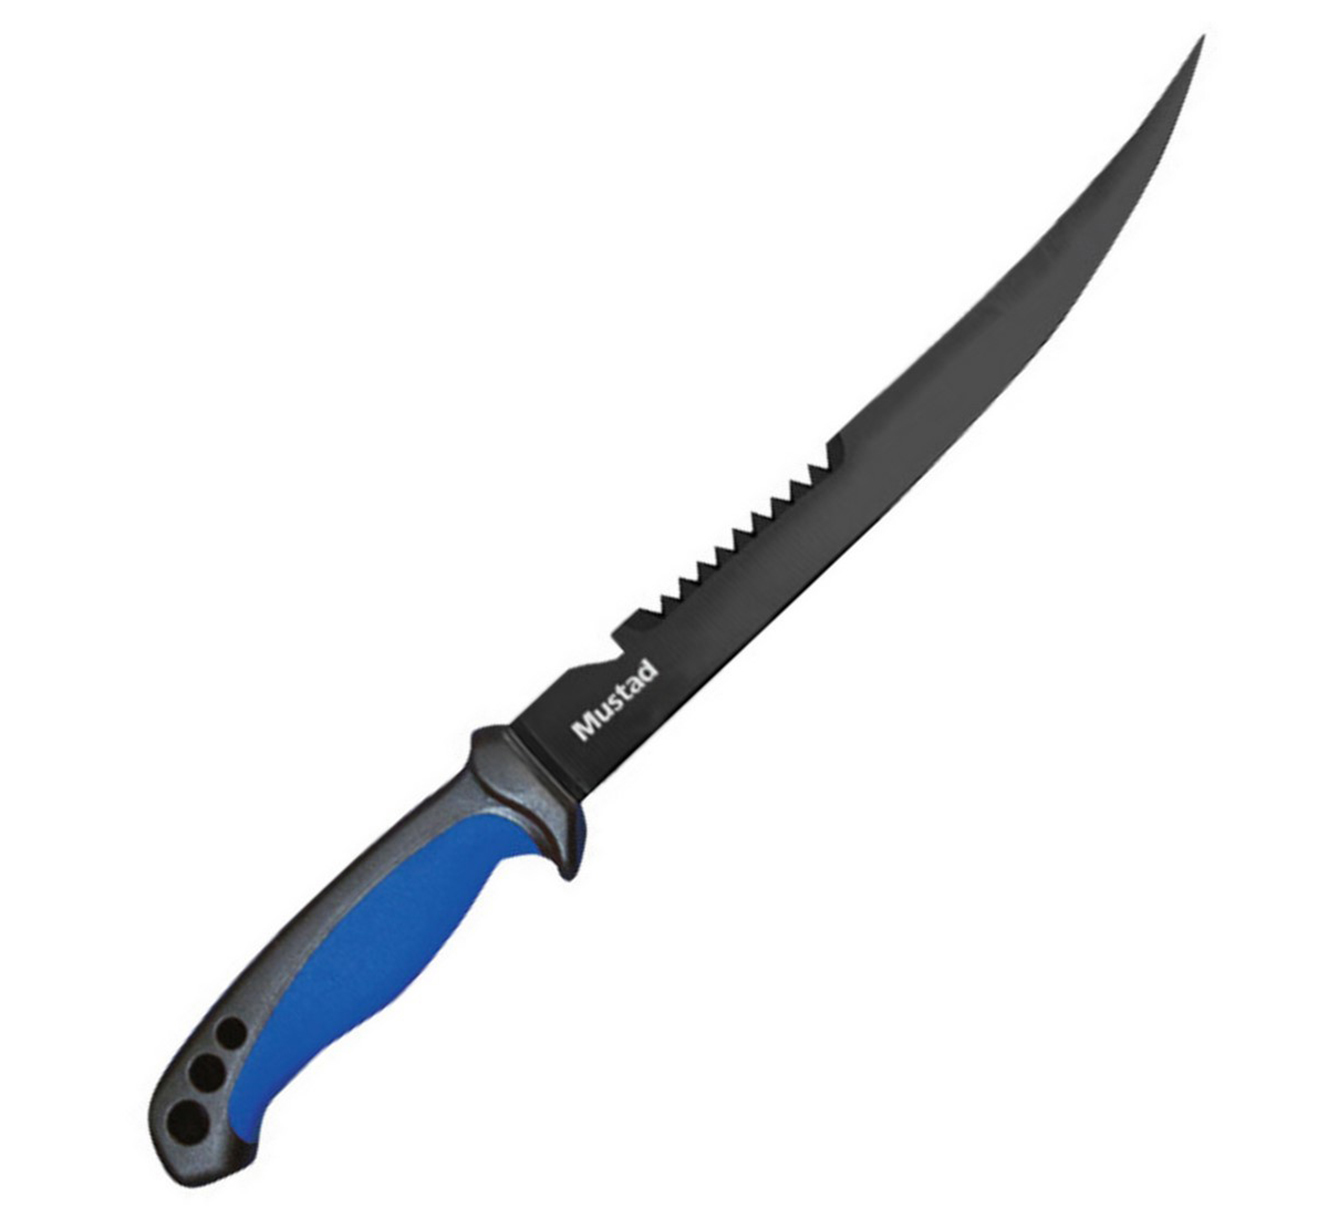 Mustad 6 Inch Stainless Steel Fillet Knife with Sheath